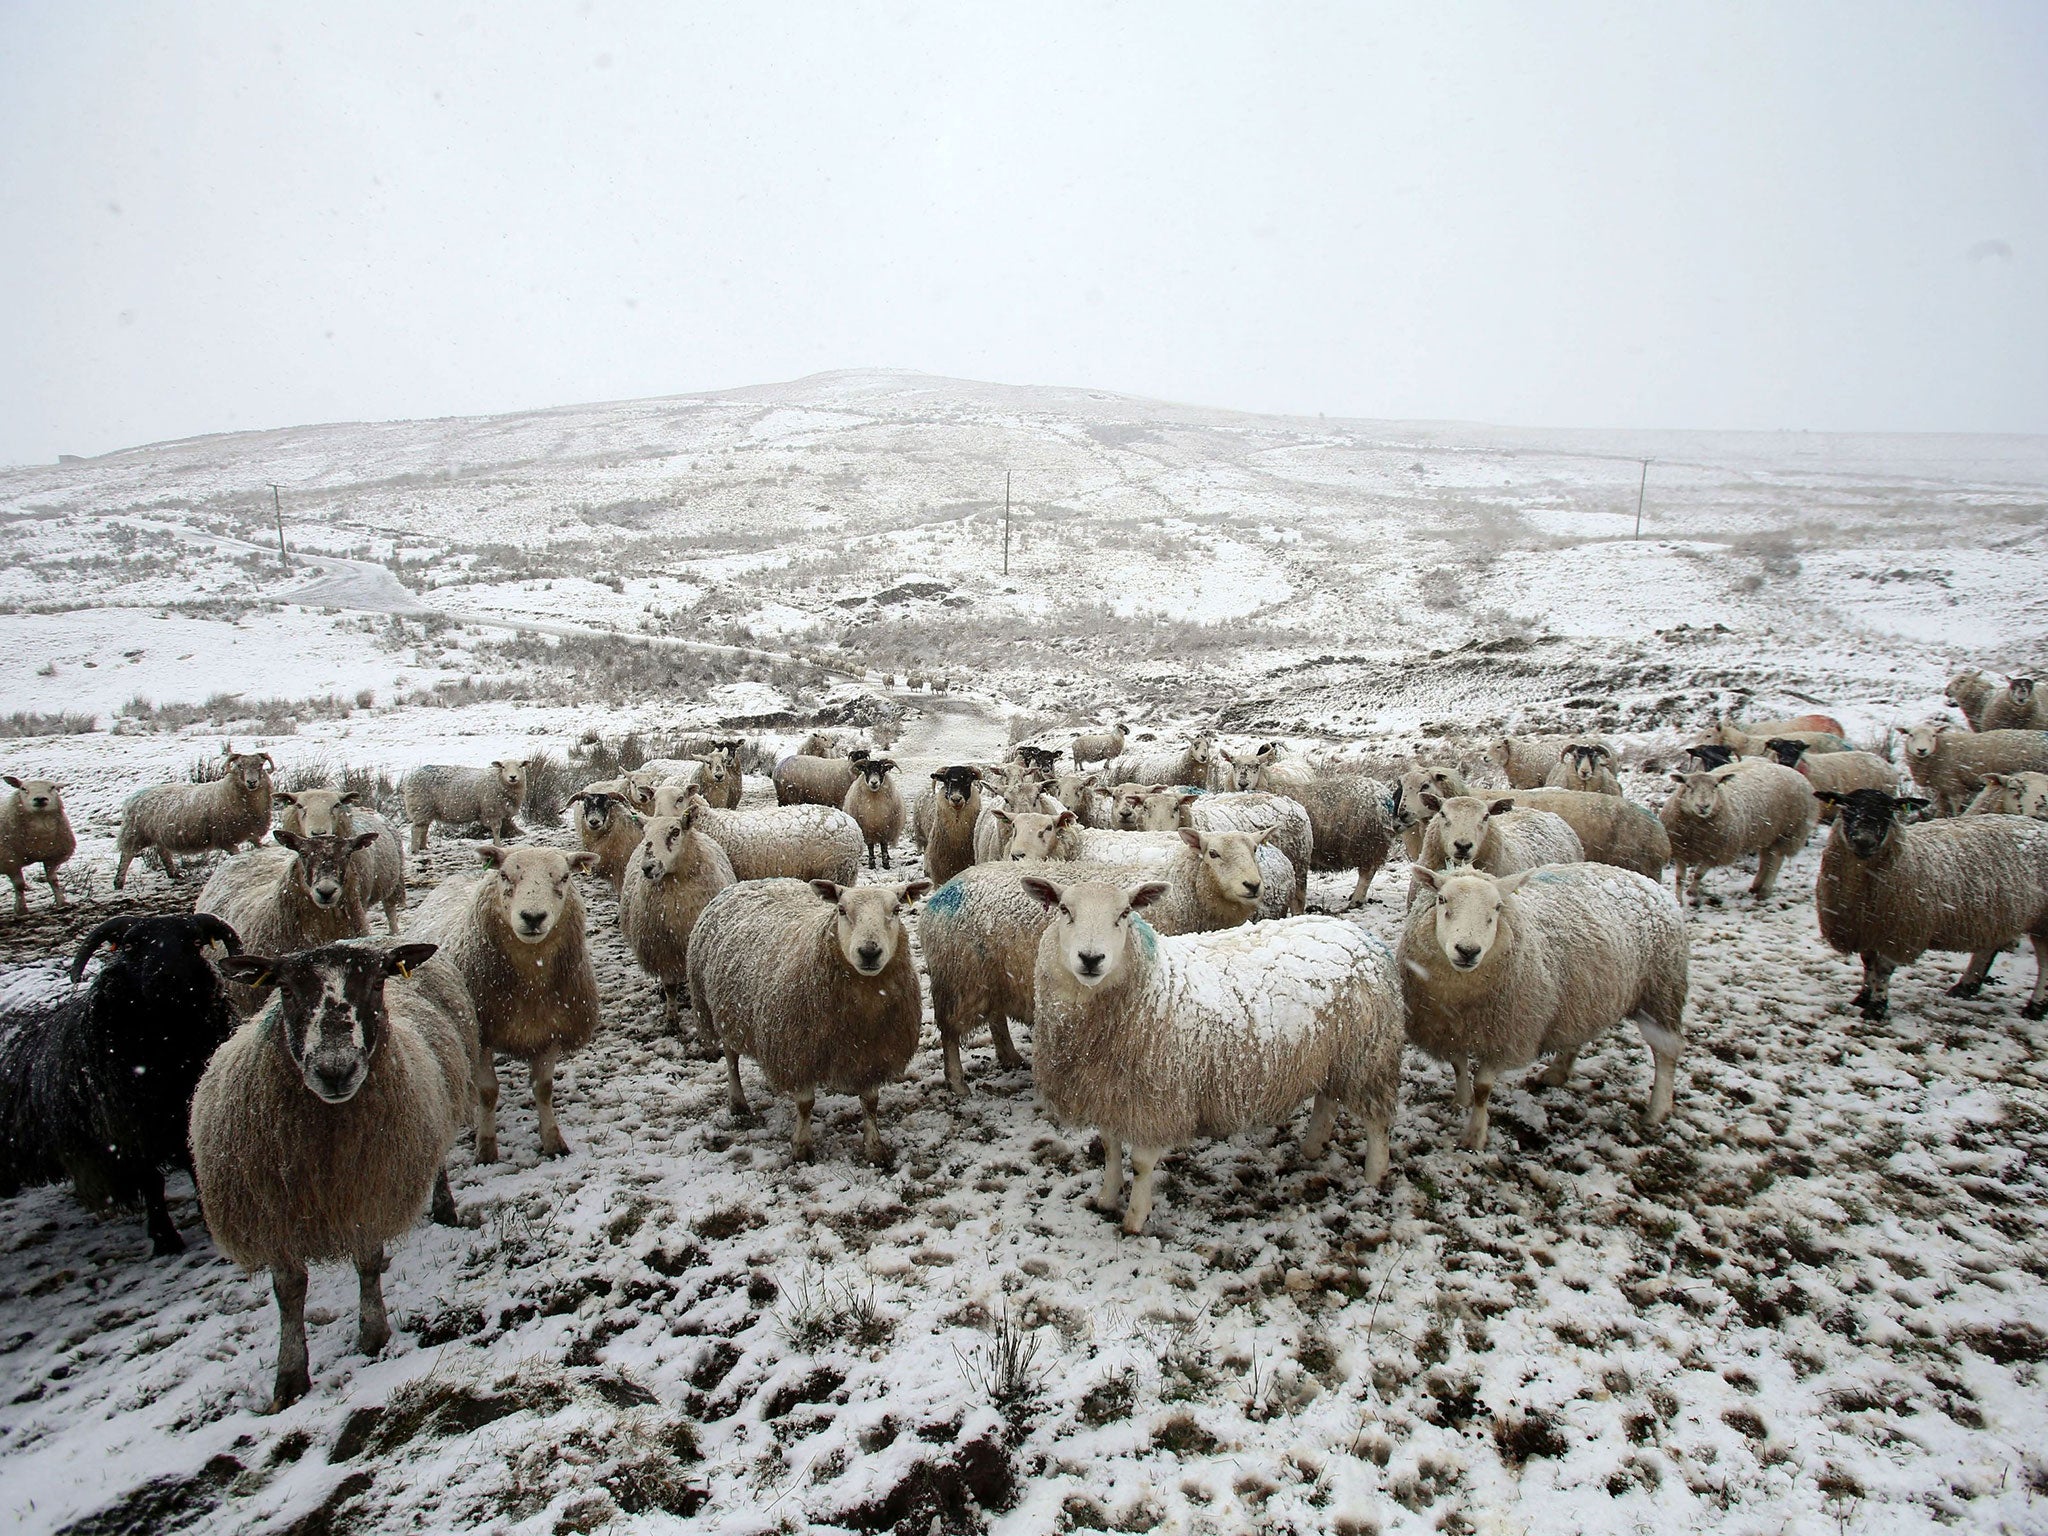 Sheep in snow, in the Glens of Antrim, as an orange weather alert is announced in Northern Ireland